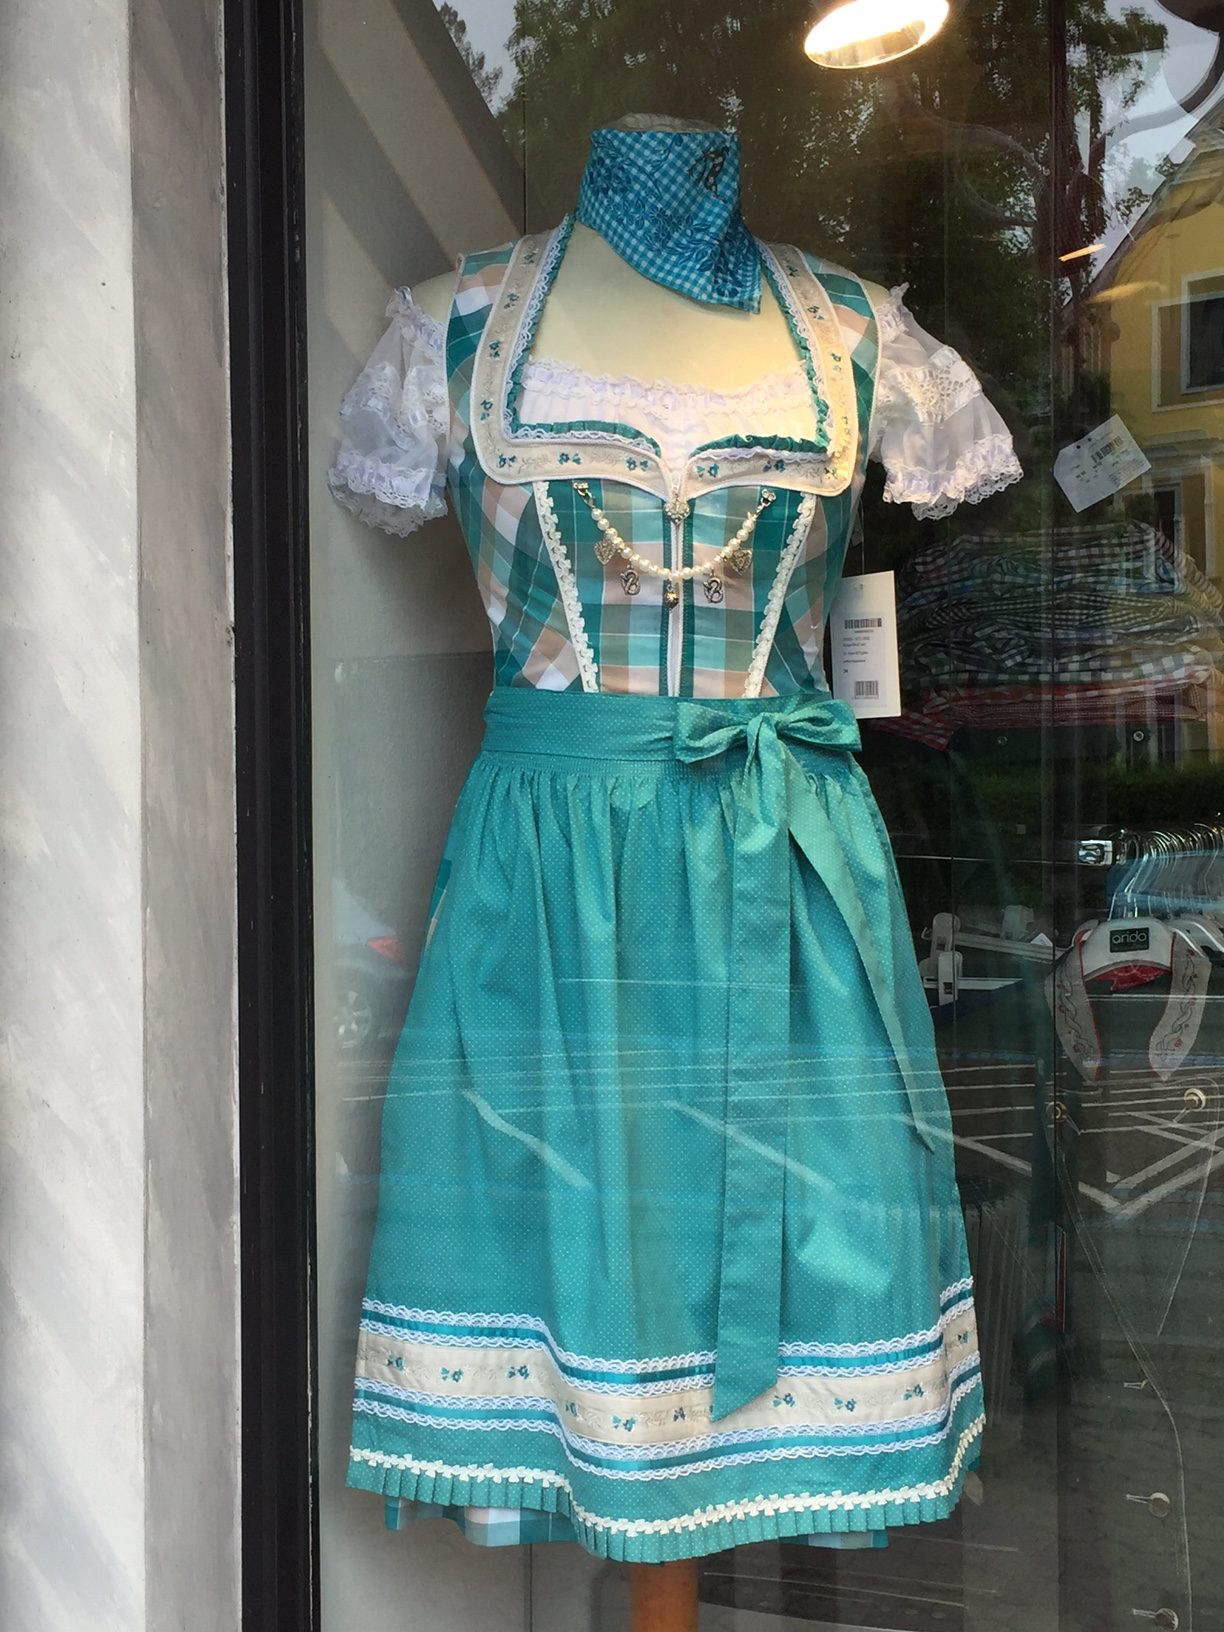 Austria: And their traditional dresses.